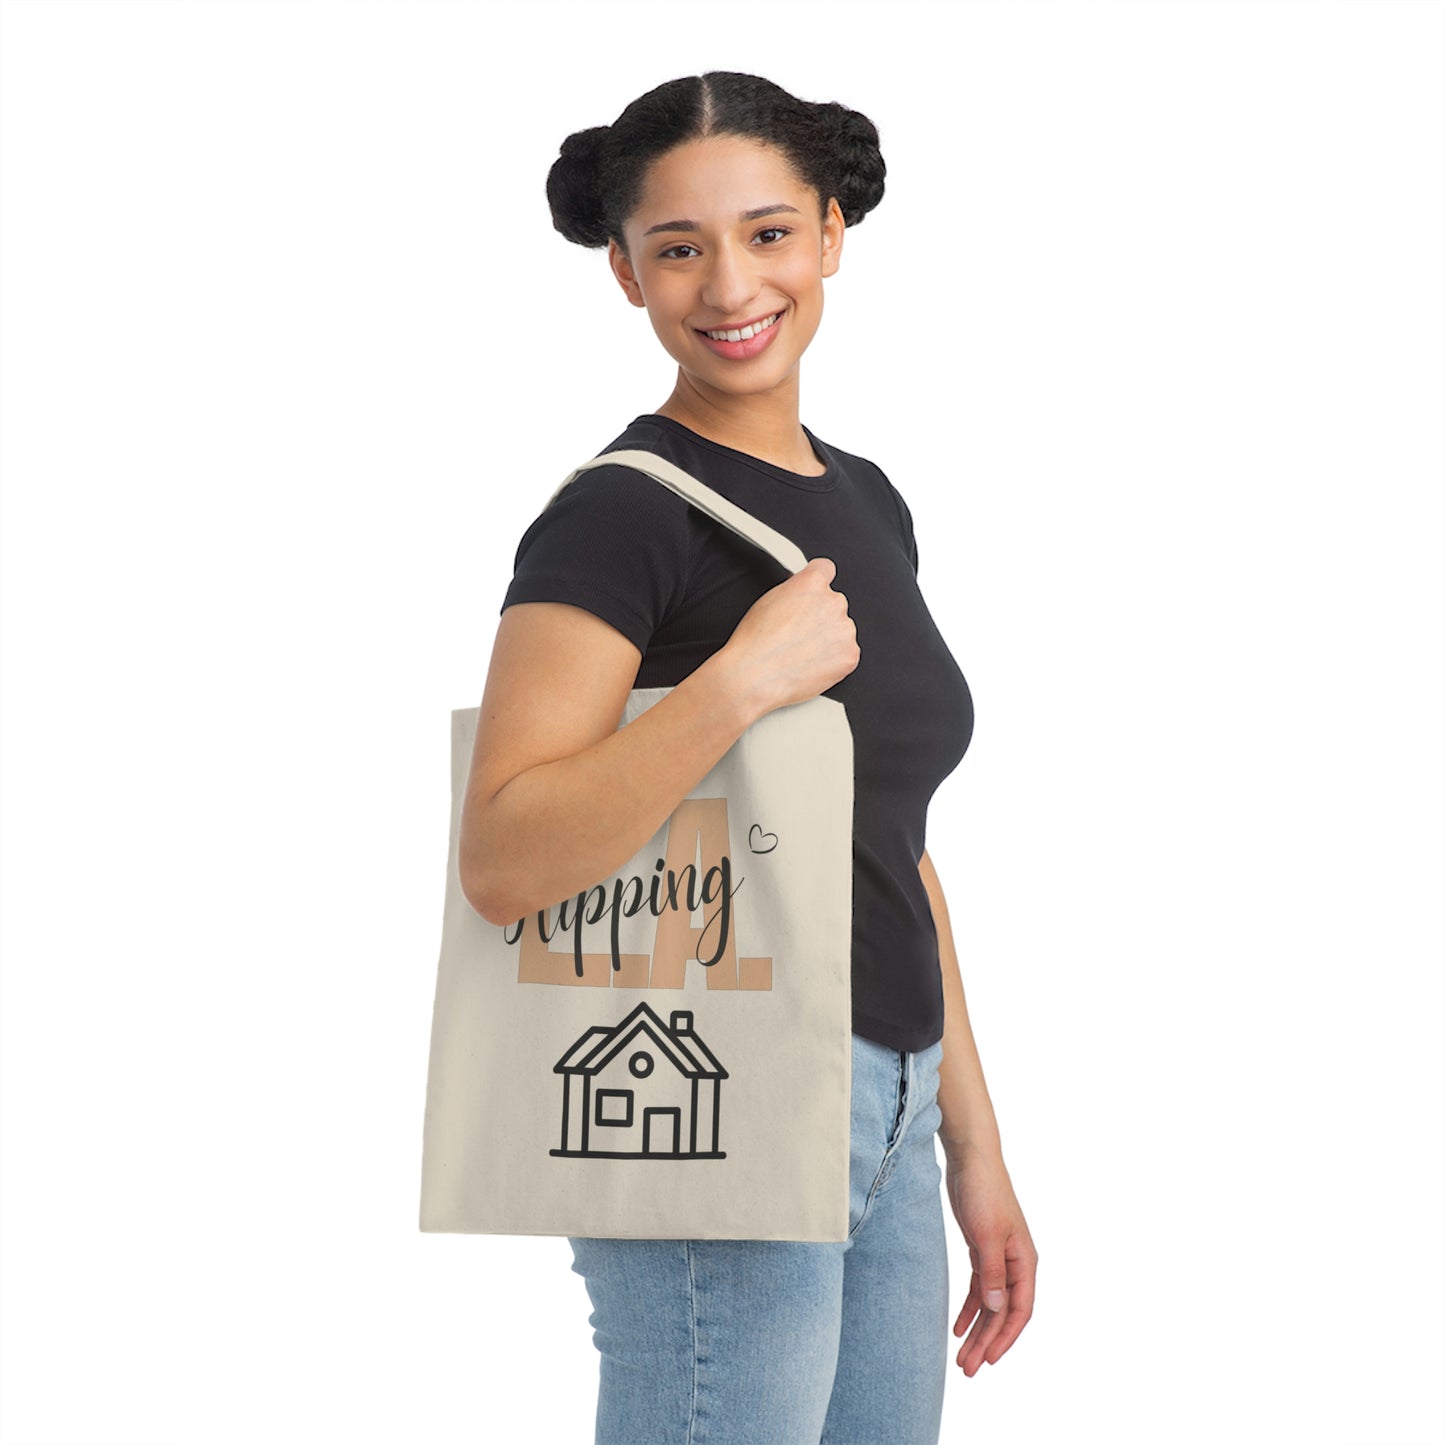 Hipping Tote Bag